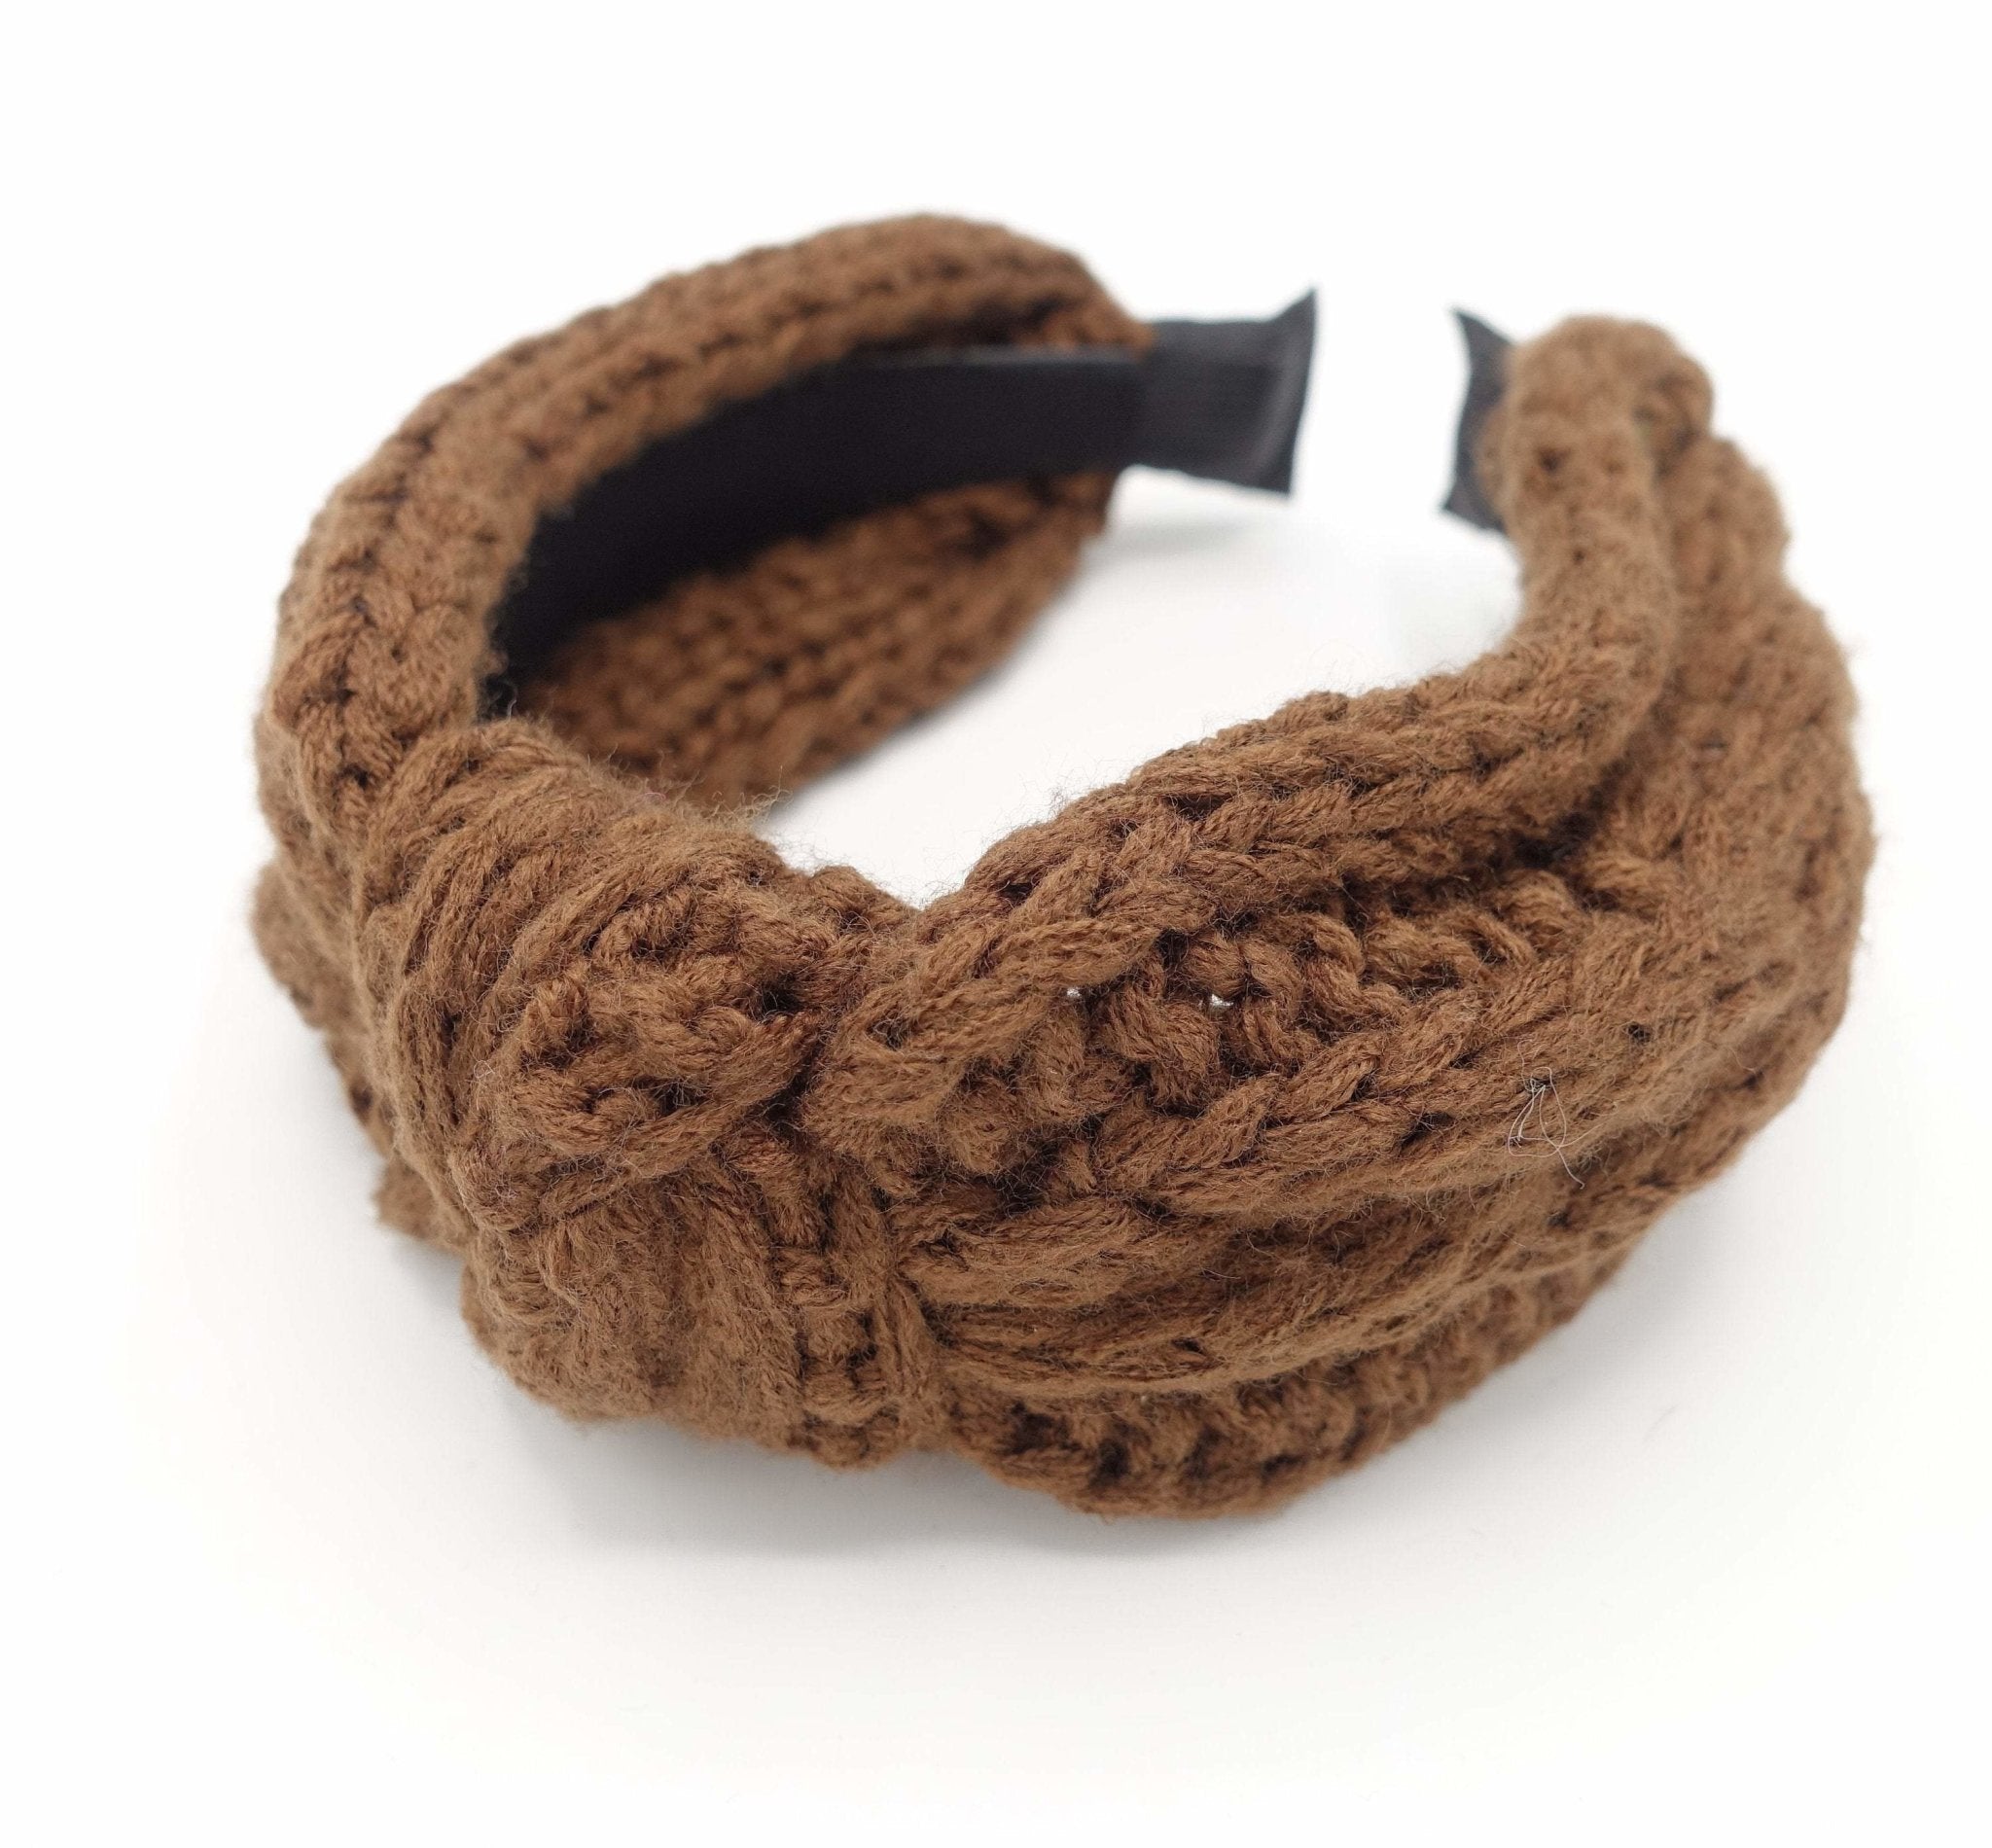 veryshine.com Accessories cable knit headband knotted hairband Winter hair accessory for women